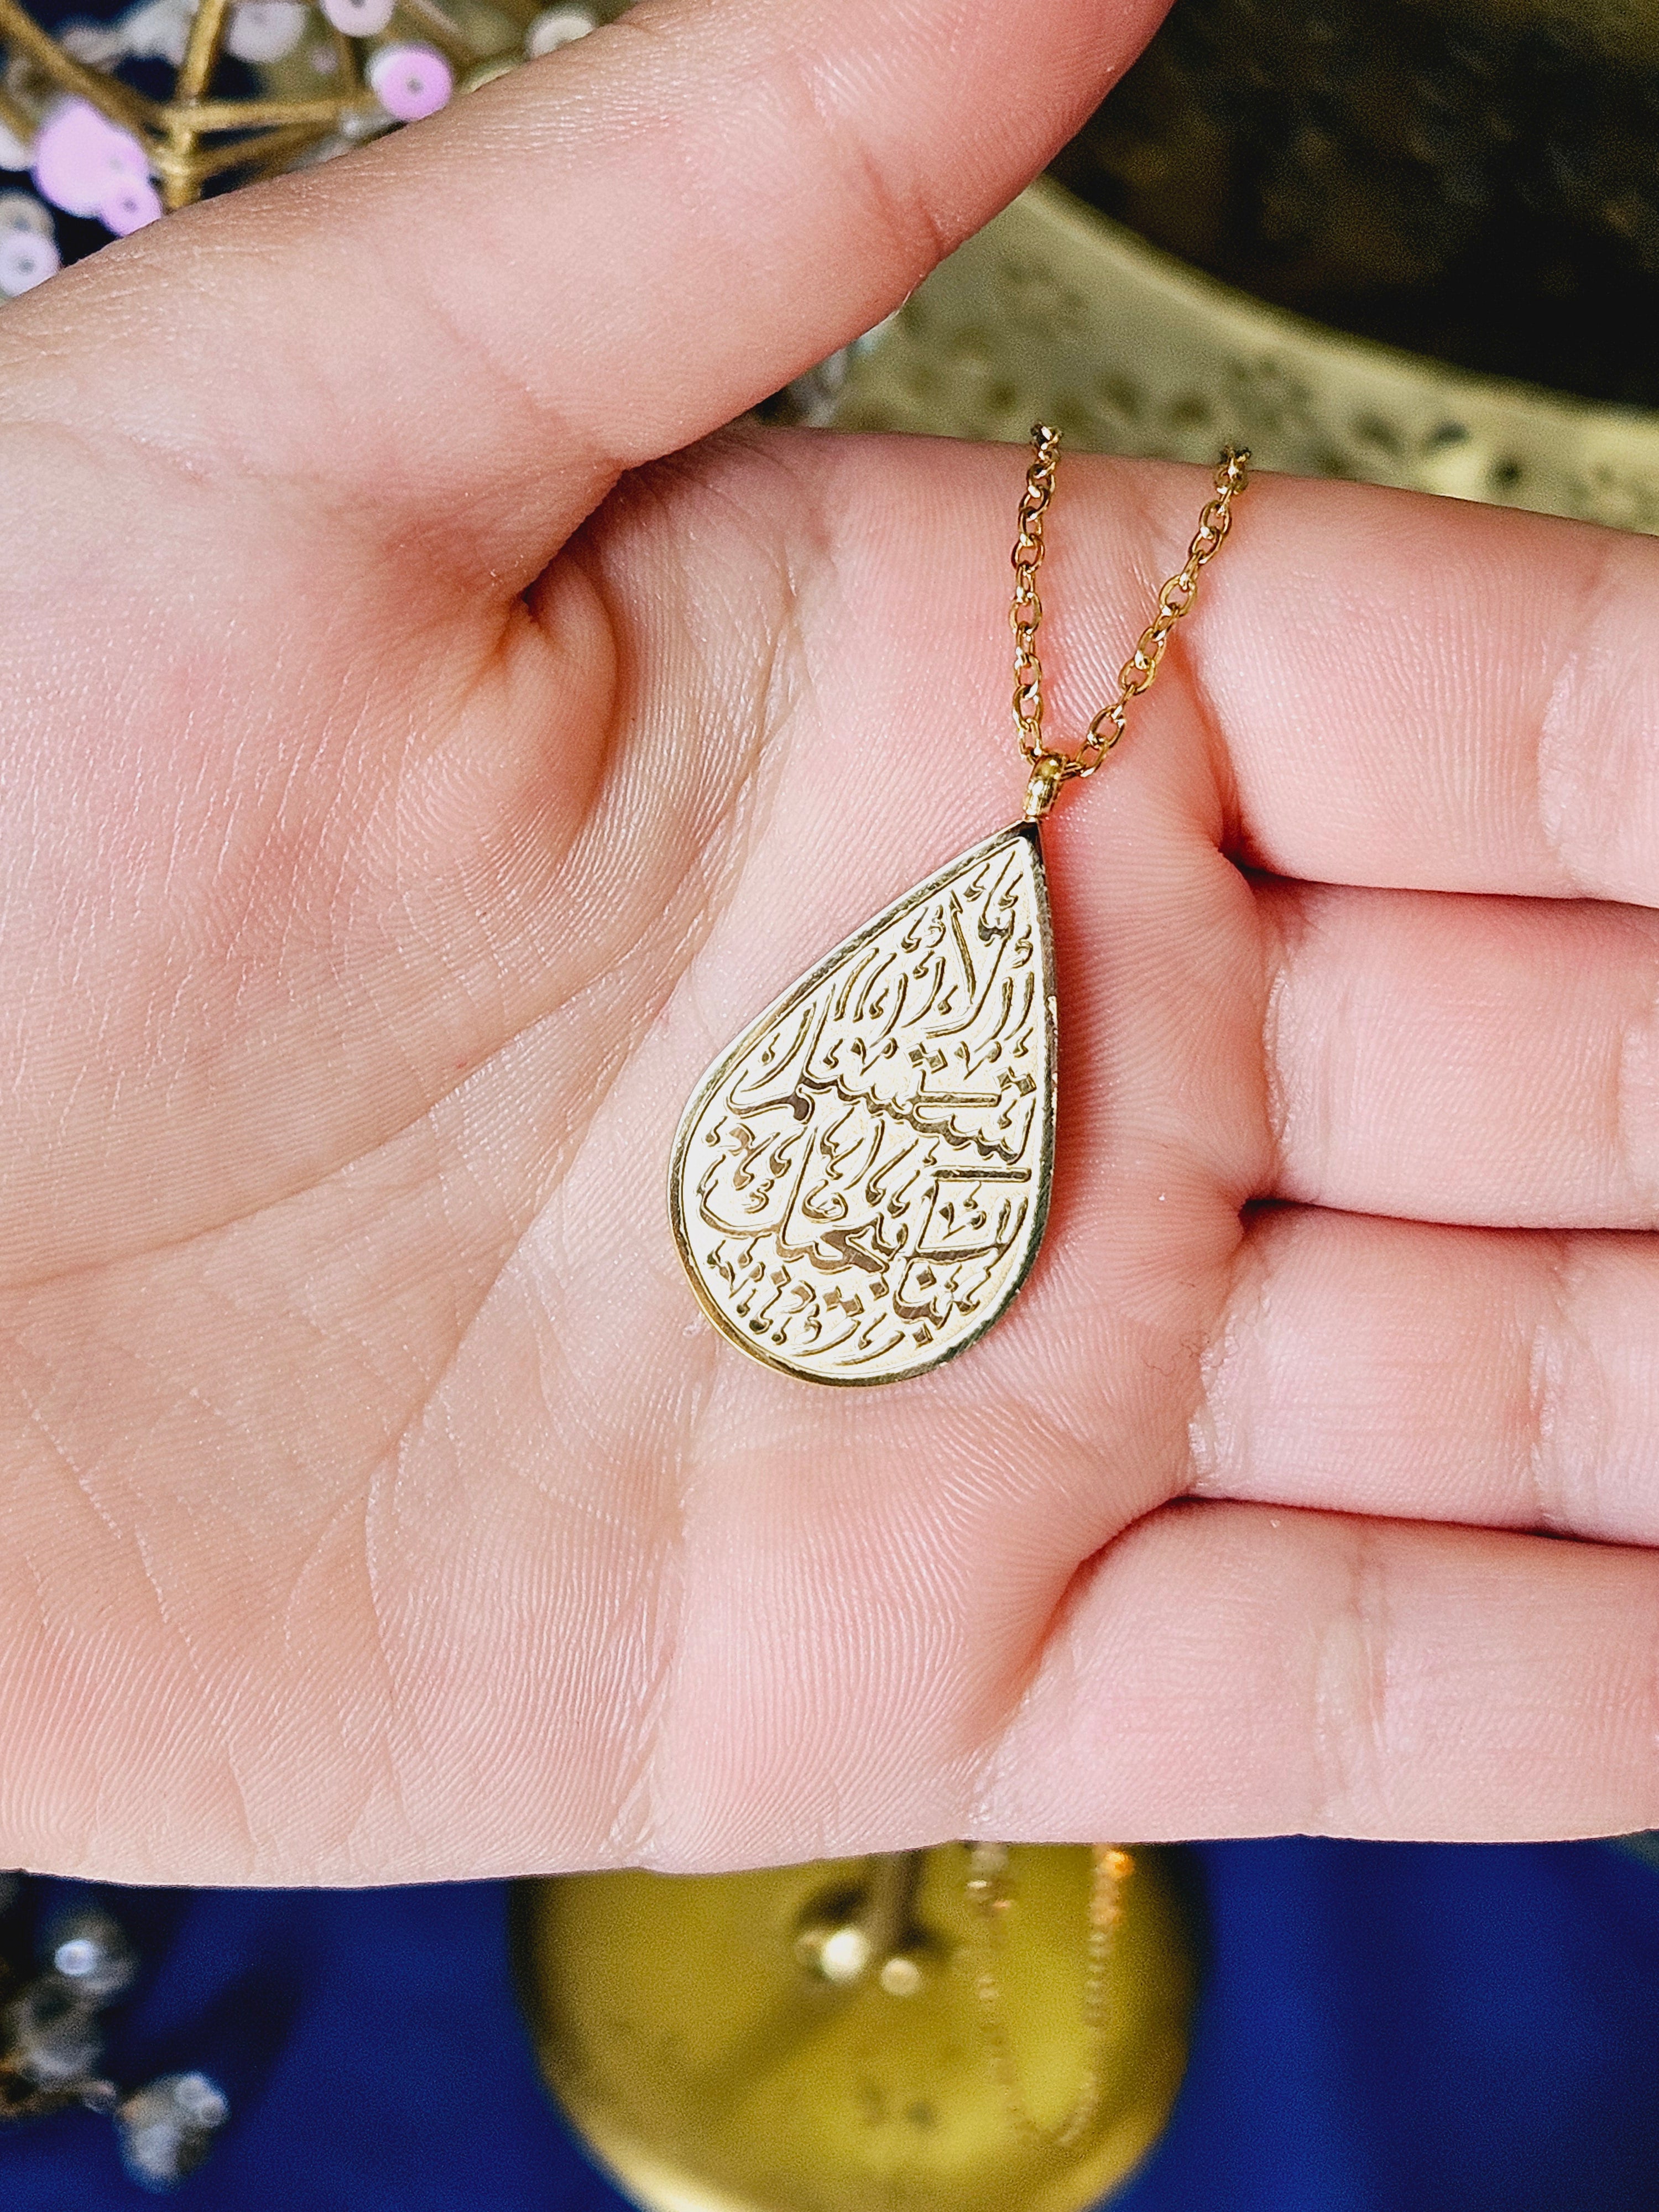 "Don't Give Up, Allah Loves You" Arabic Calligraphy Necklace - Habibi Heritage